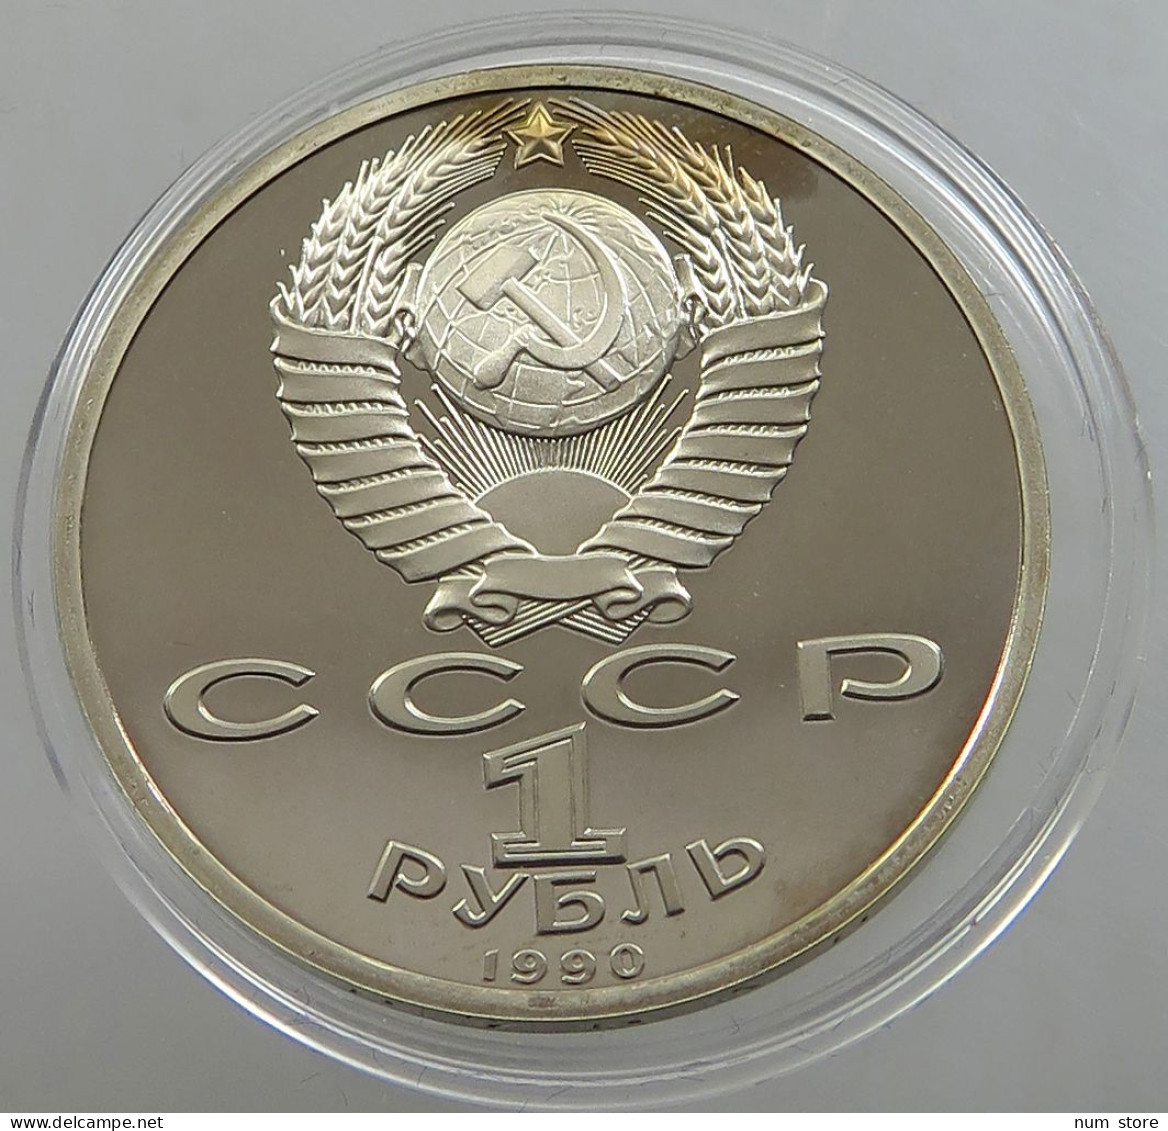 RUSSIA USSR 1 ROUBLE 1990 ZHUKOV PROOF #sm14 0751 - Russland